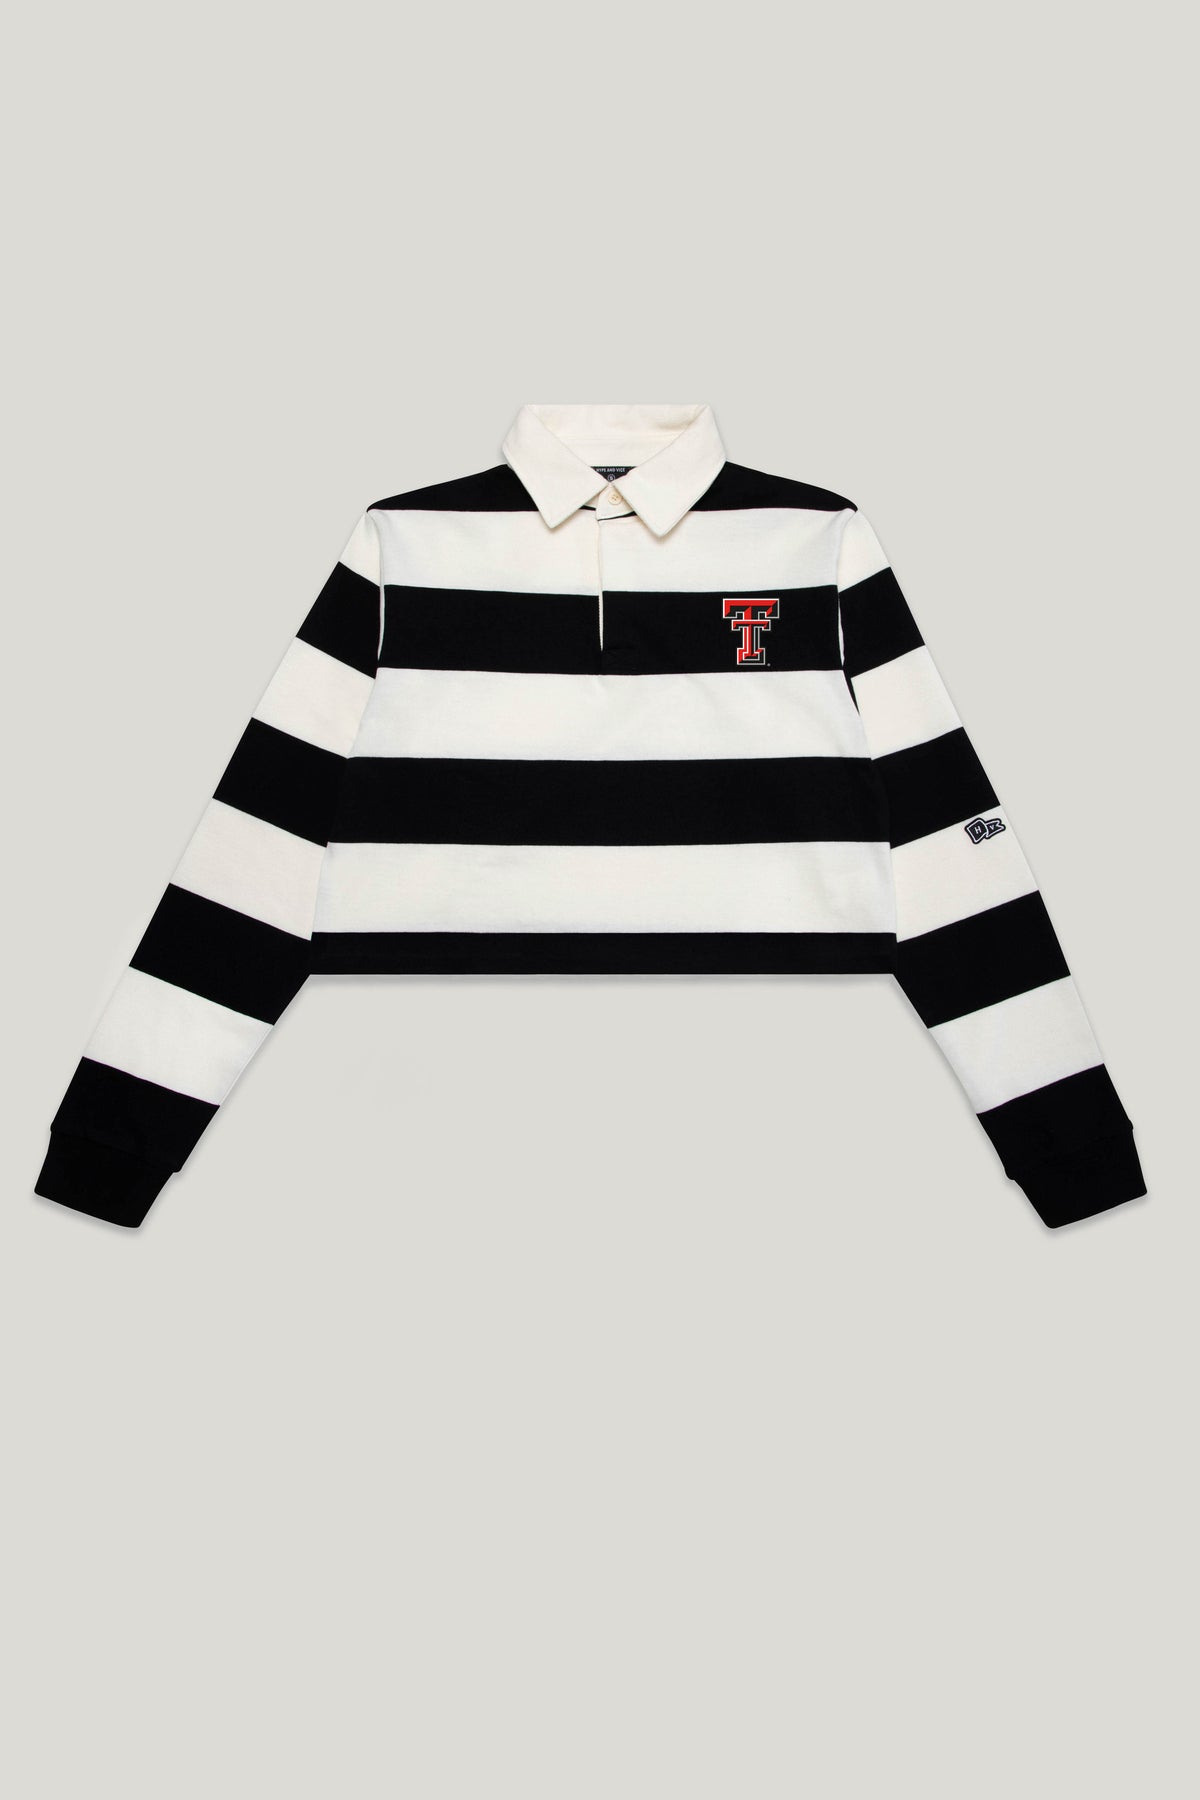 Texas Tech Rugby Top